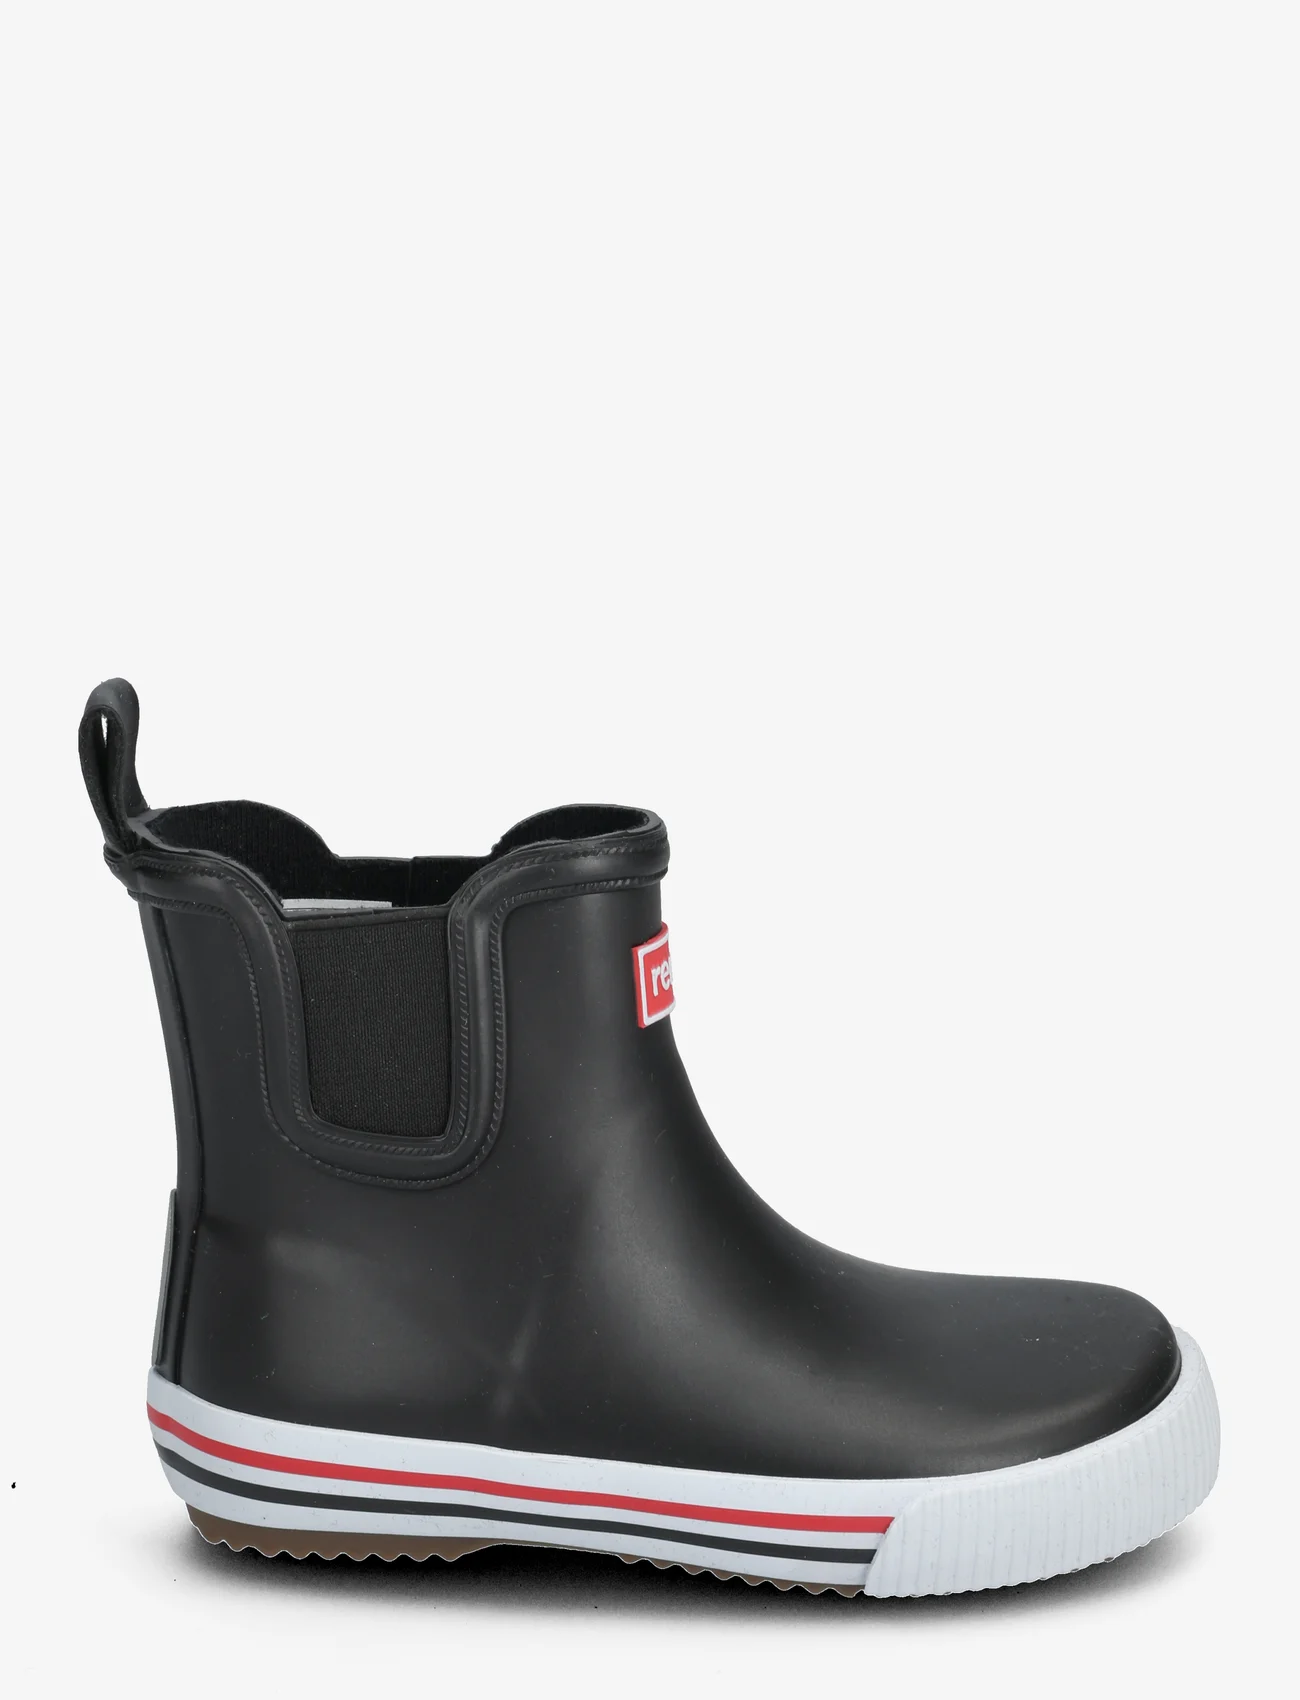 Reima - Rain boots, Ankles - unlined rubberboots - black - 1